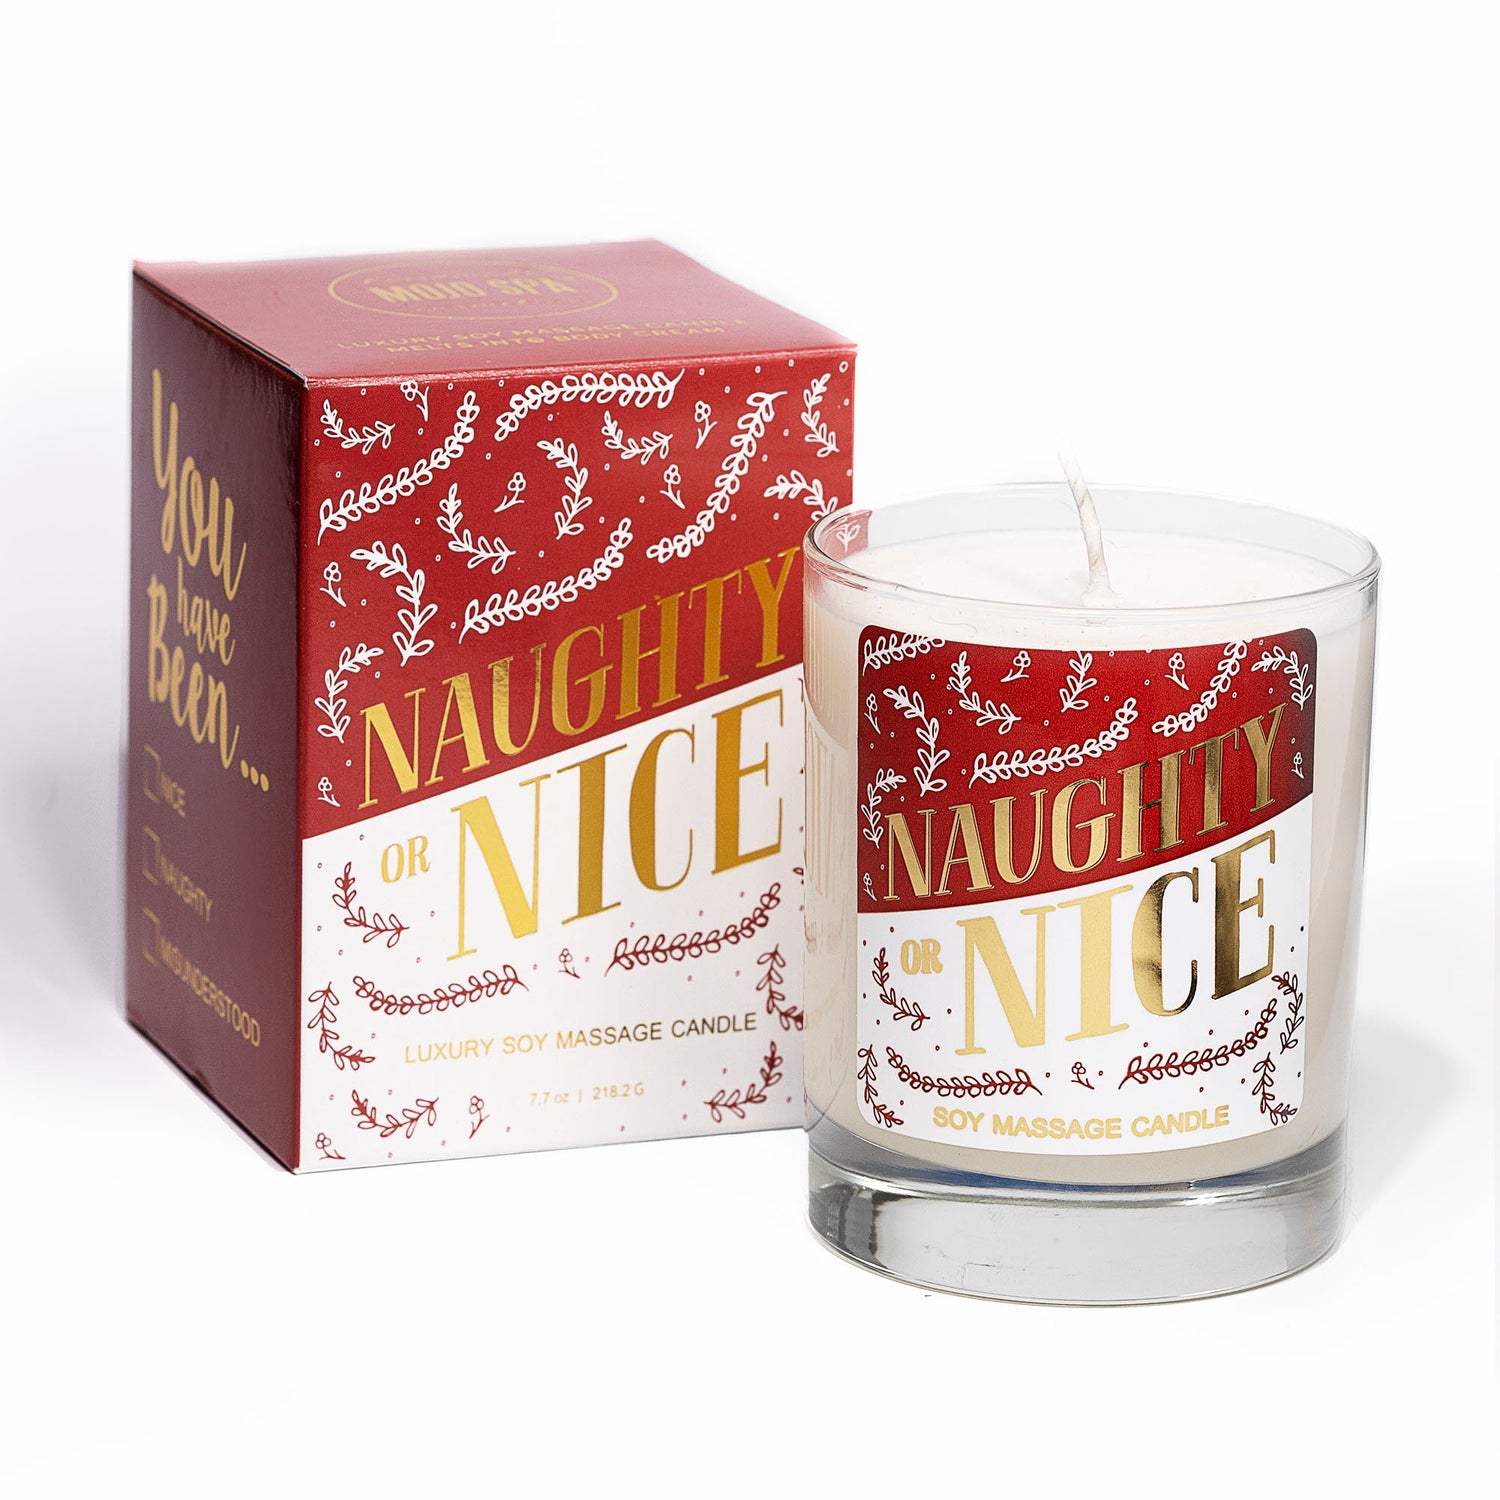 Naughty or Nice Soy Massage Candle